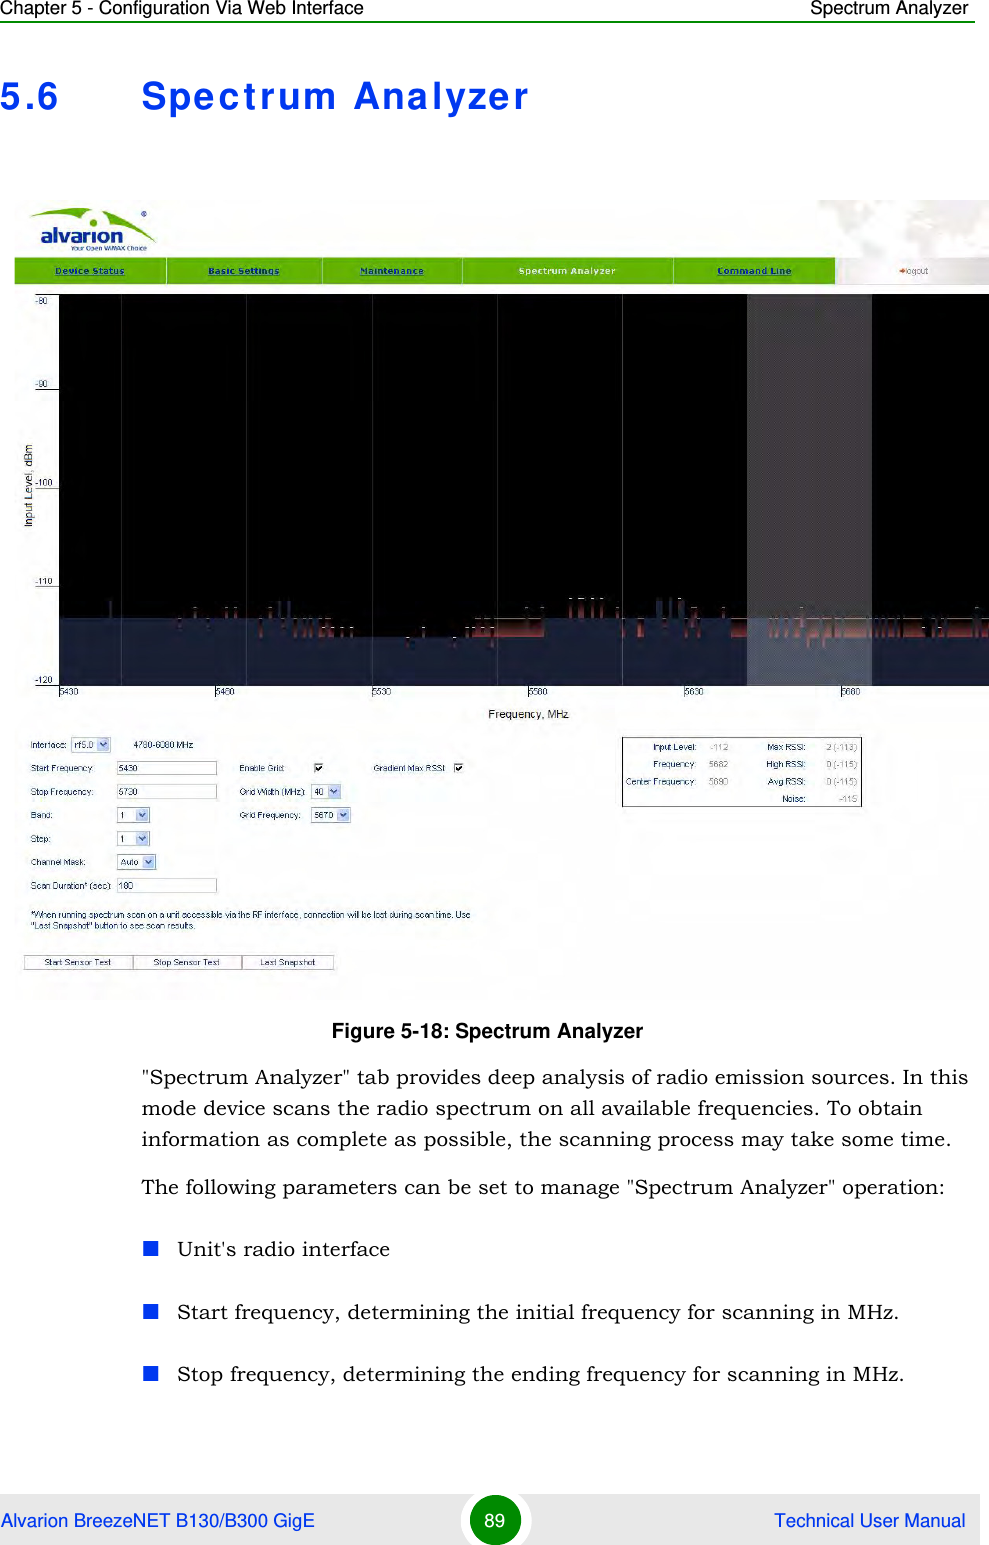 Chapter 5 - Configuration Via Web Interface Spectrum AnalyzerAlvarion BreezeNET B130/B300 GigE 89  Technical User Manual5.6 Spectrum Analyzer&quot;Spectrum Analyzer&quot; tab provides deep analysis of radio emission sources. In this mode device scans the radio spectrum on all available frequencies. To obtain information as complete as possible, the scanning process may take some time.The following parameters can be set to manage &quot;Spectrum Analyzer&quot; operation:Unit&apos;s radio interfaceStart frequency, determining the initial frequency for scanning in MHz.Stop frequency, determining the ending frequency for scanning in MHz.Figure 5-18: Spectrum Analyzer